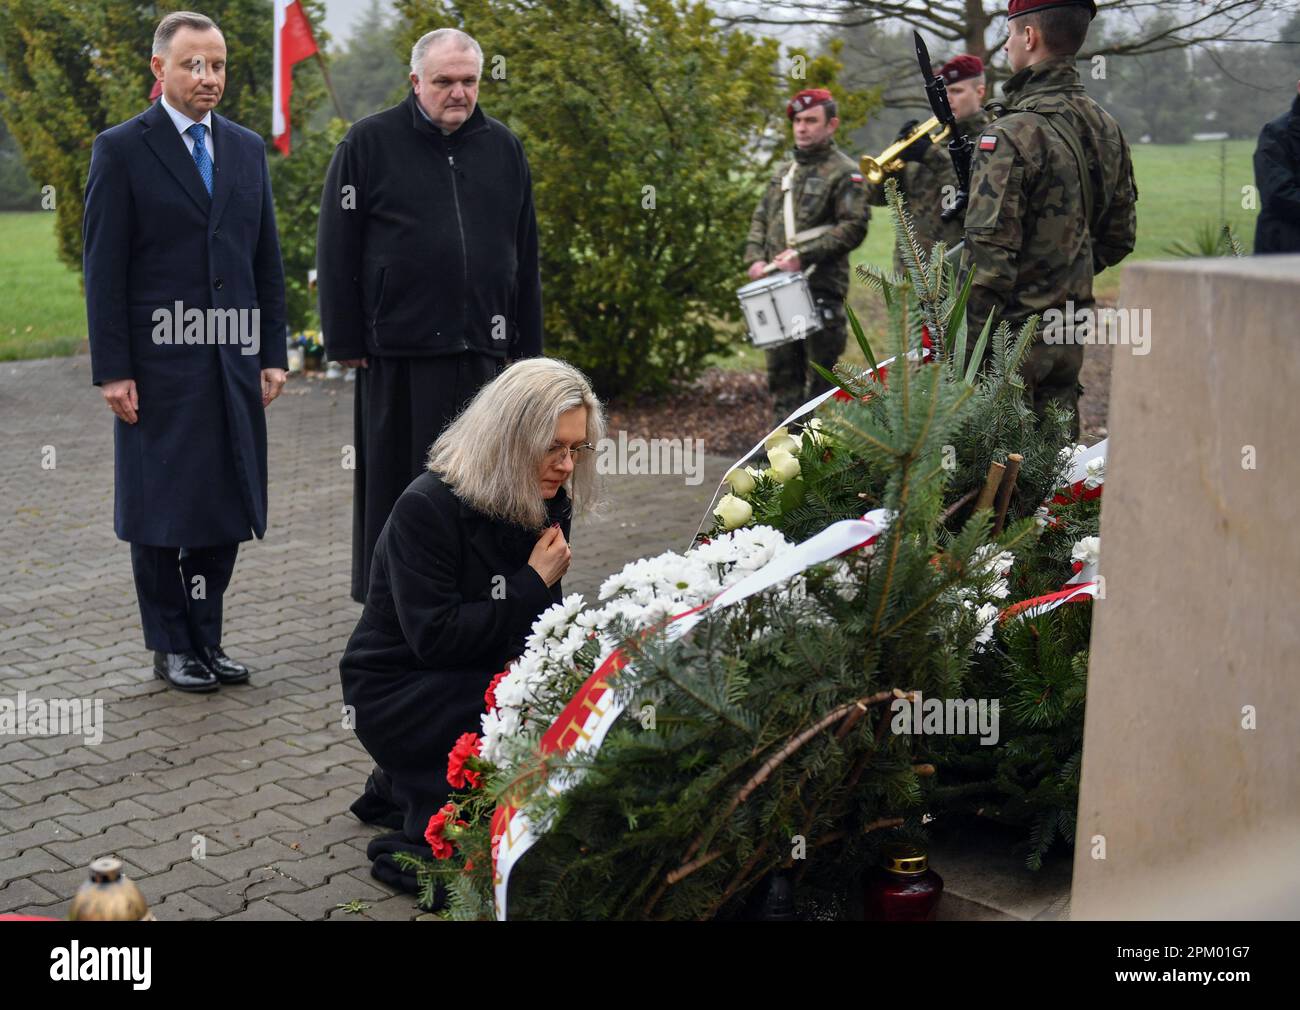 Malgorzata Wassermann (daughter of Zbigniew Wassermann) and the President of Poland Andrzej Duda seen at the grave of Zbigniew Wassermann, during the 13th anniversary Cemetery of his death in Bielany, Krakow. President Andrzej Duda attends the 13th anniversary of the government plane (TU154M) crash in Smolensk. The delegation led by President Lech Kaczynski died on the way to the ceremony in Katyn on April 10, 2010. 96 people were killed, including the President of the Republic of Poland Lech Kaczynski, and his wife, MPs, ministers, senators, military commanders, and others. Stock Photo